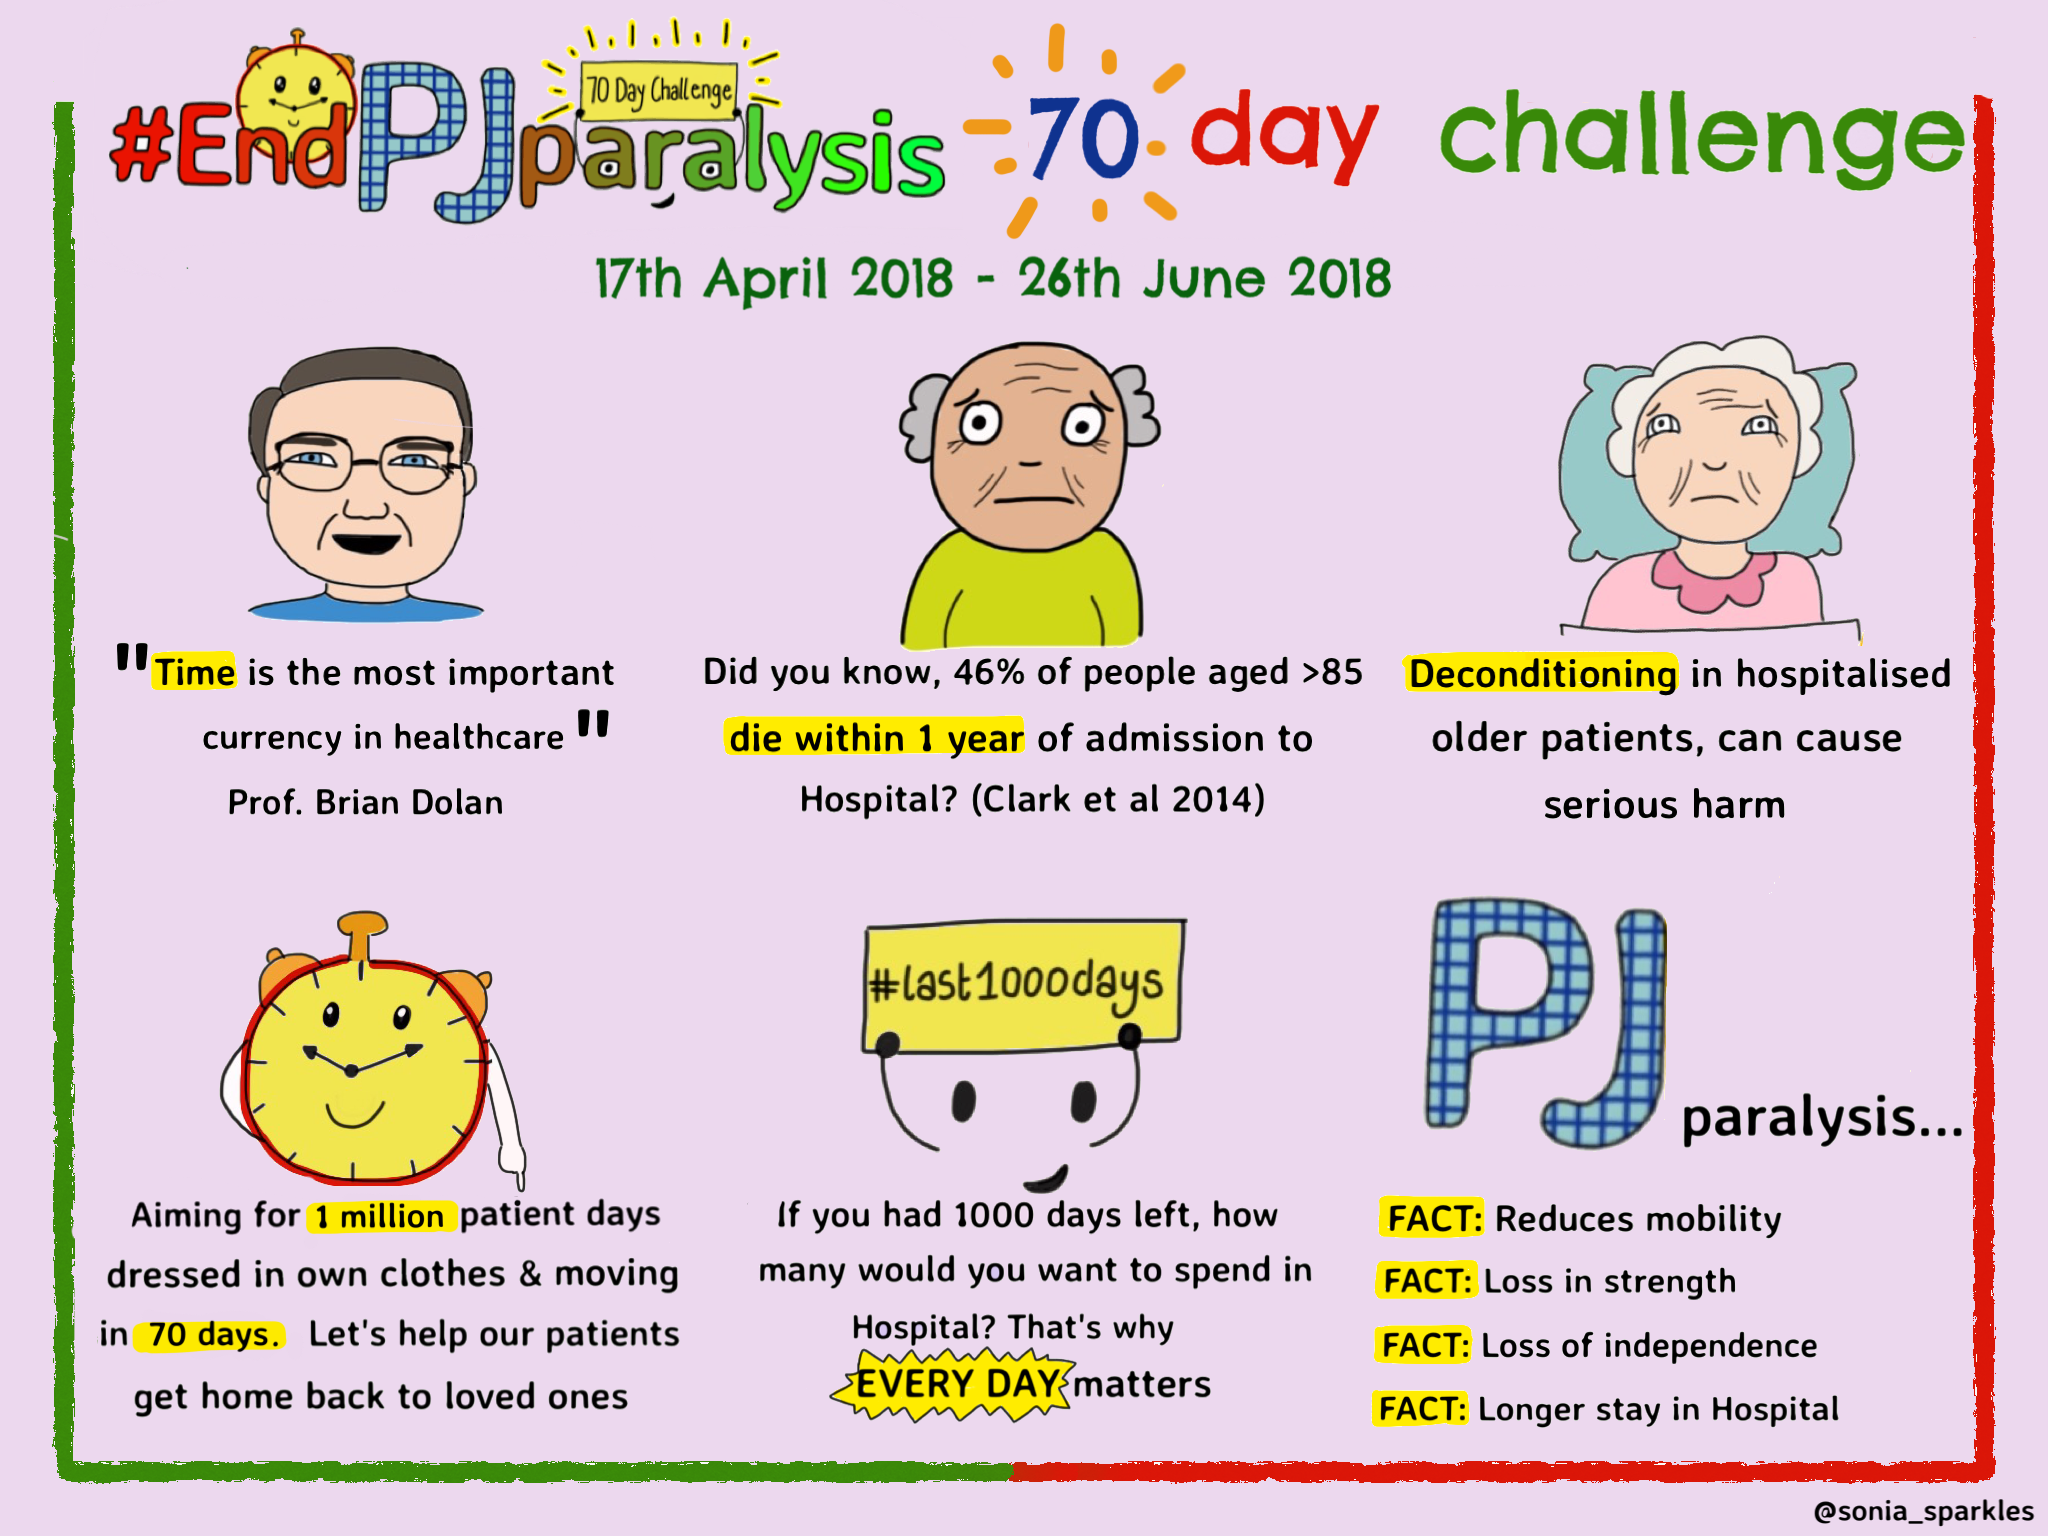 Ditch those jammies': Campaign to #EndPJParalysis at Hull Royal Infirmary  and Castle Hill Hospital | Hull University Teaching Hospitals NHS Trust